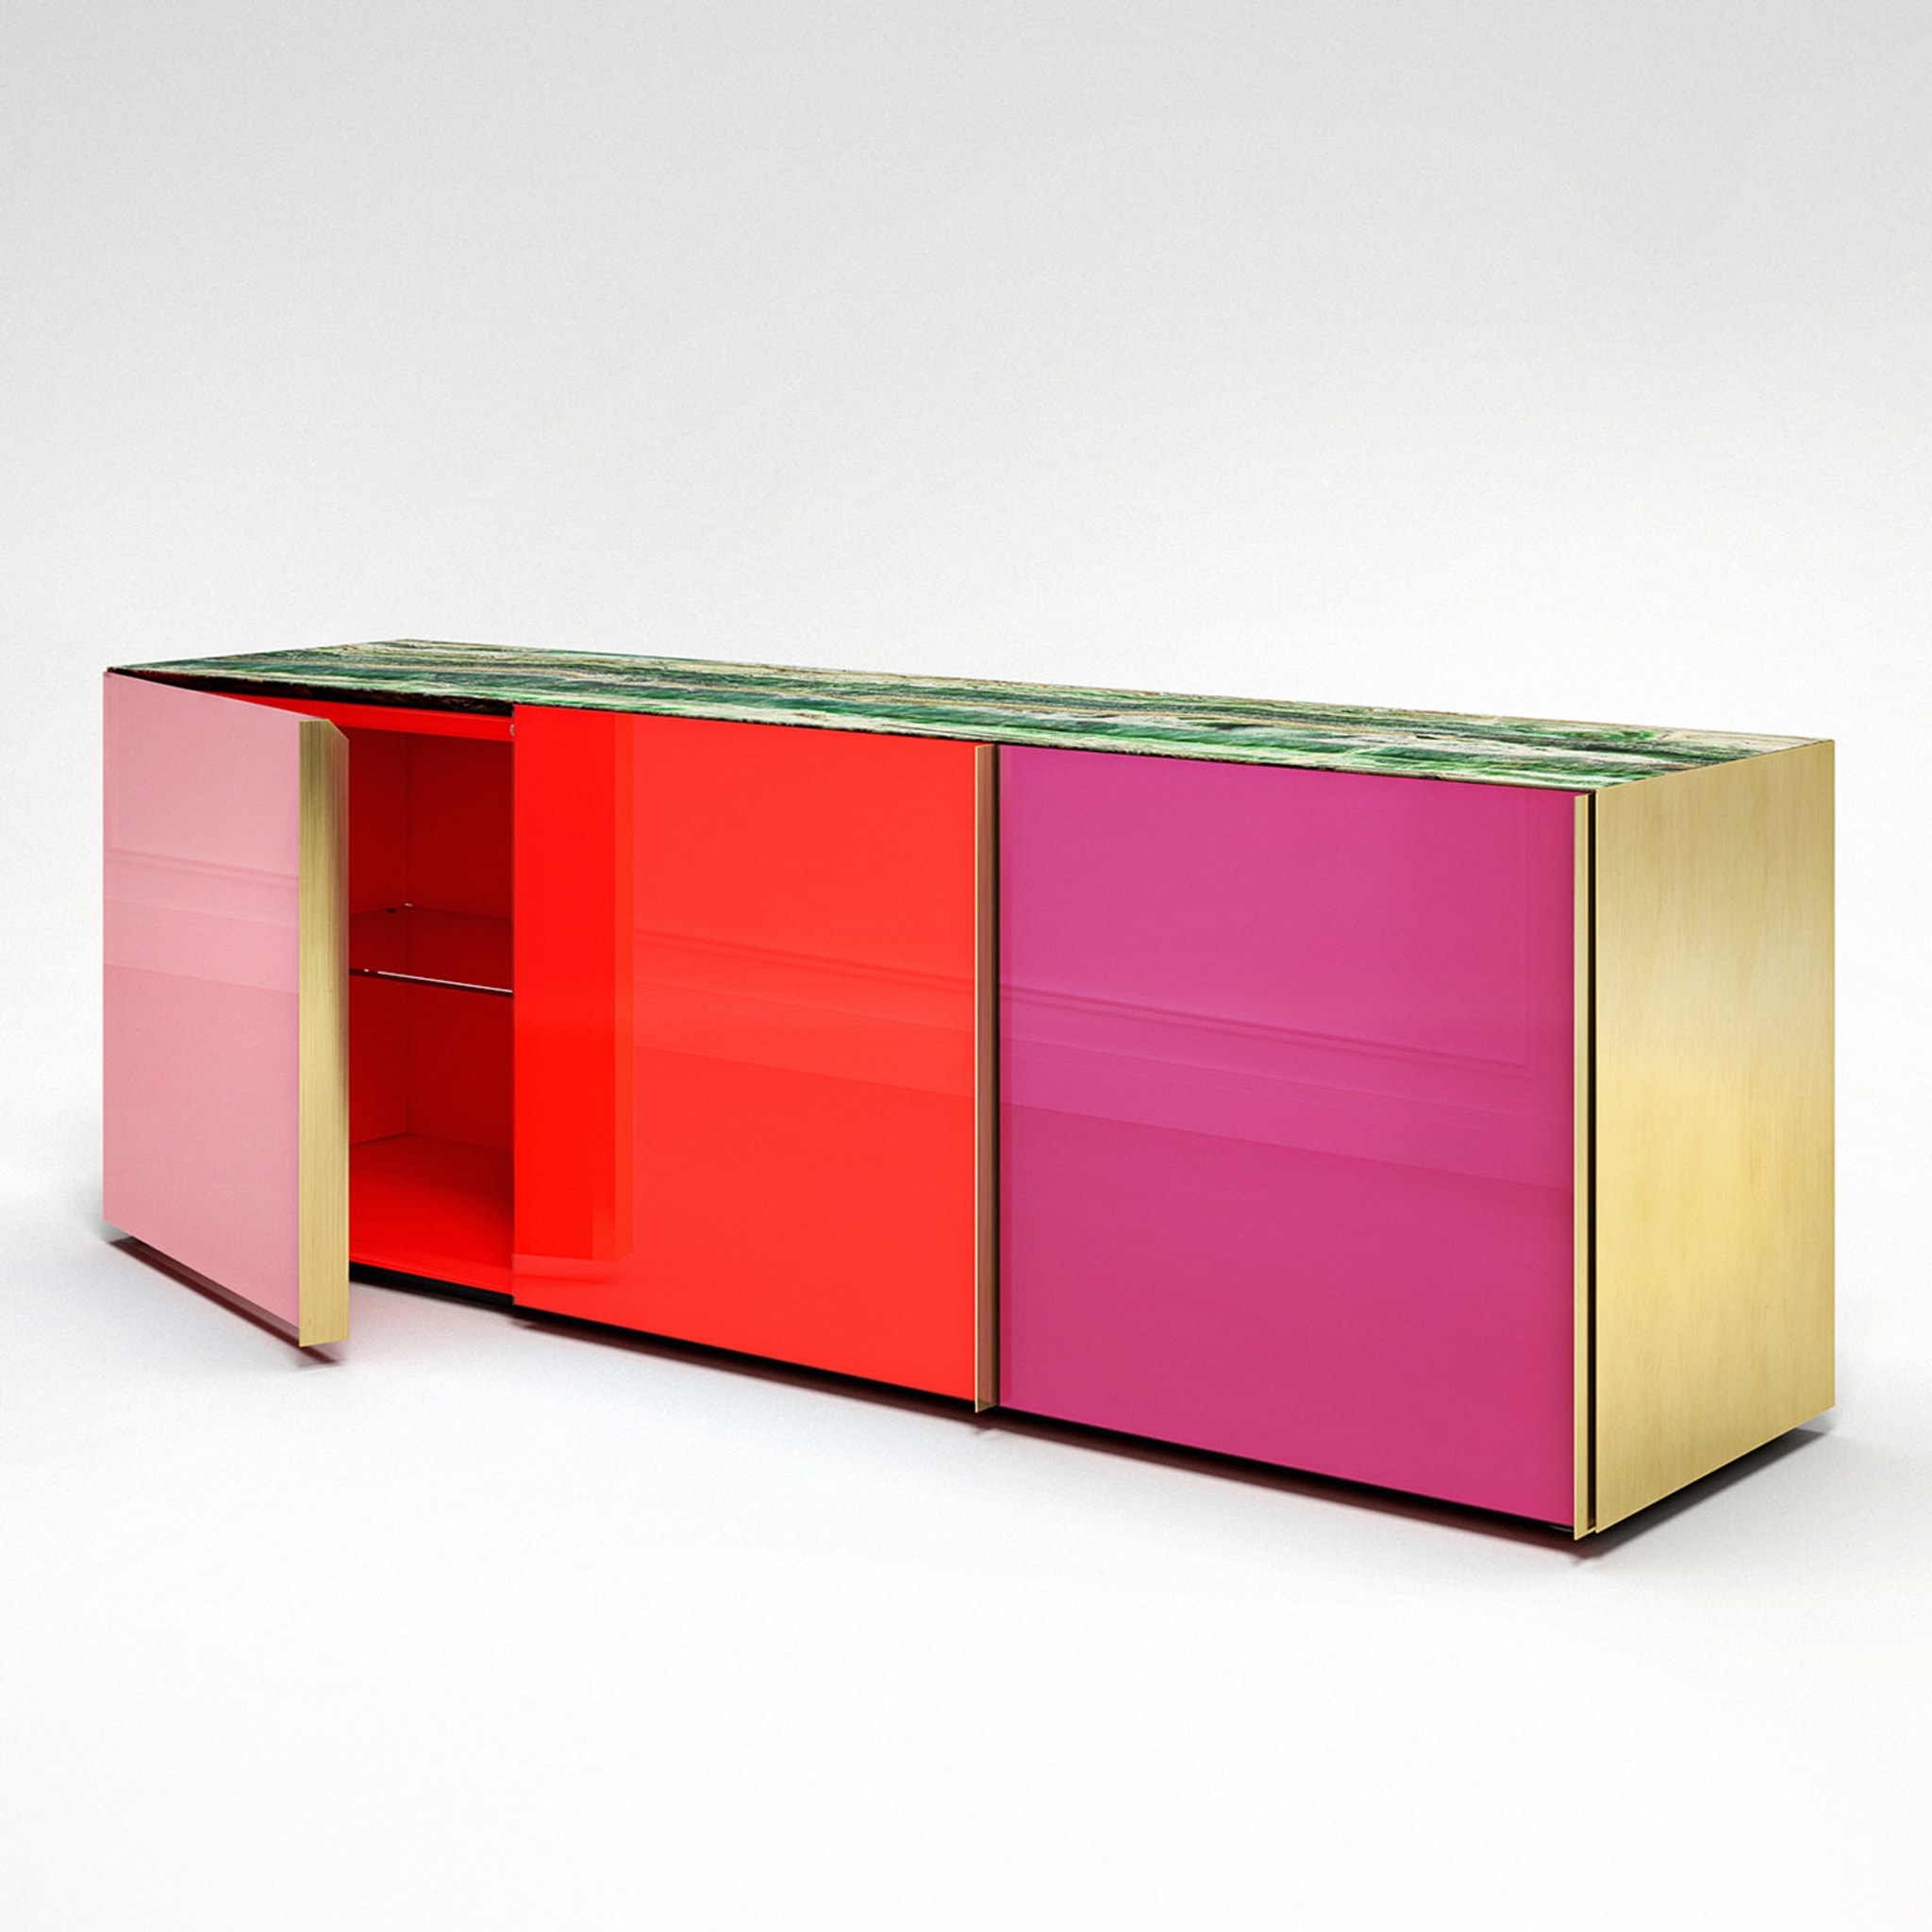 Sideboard 01 Red - Alternative view 1